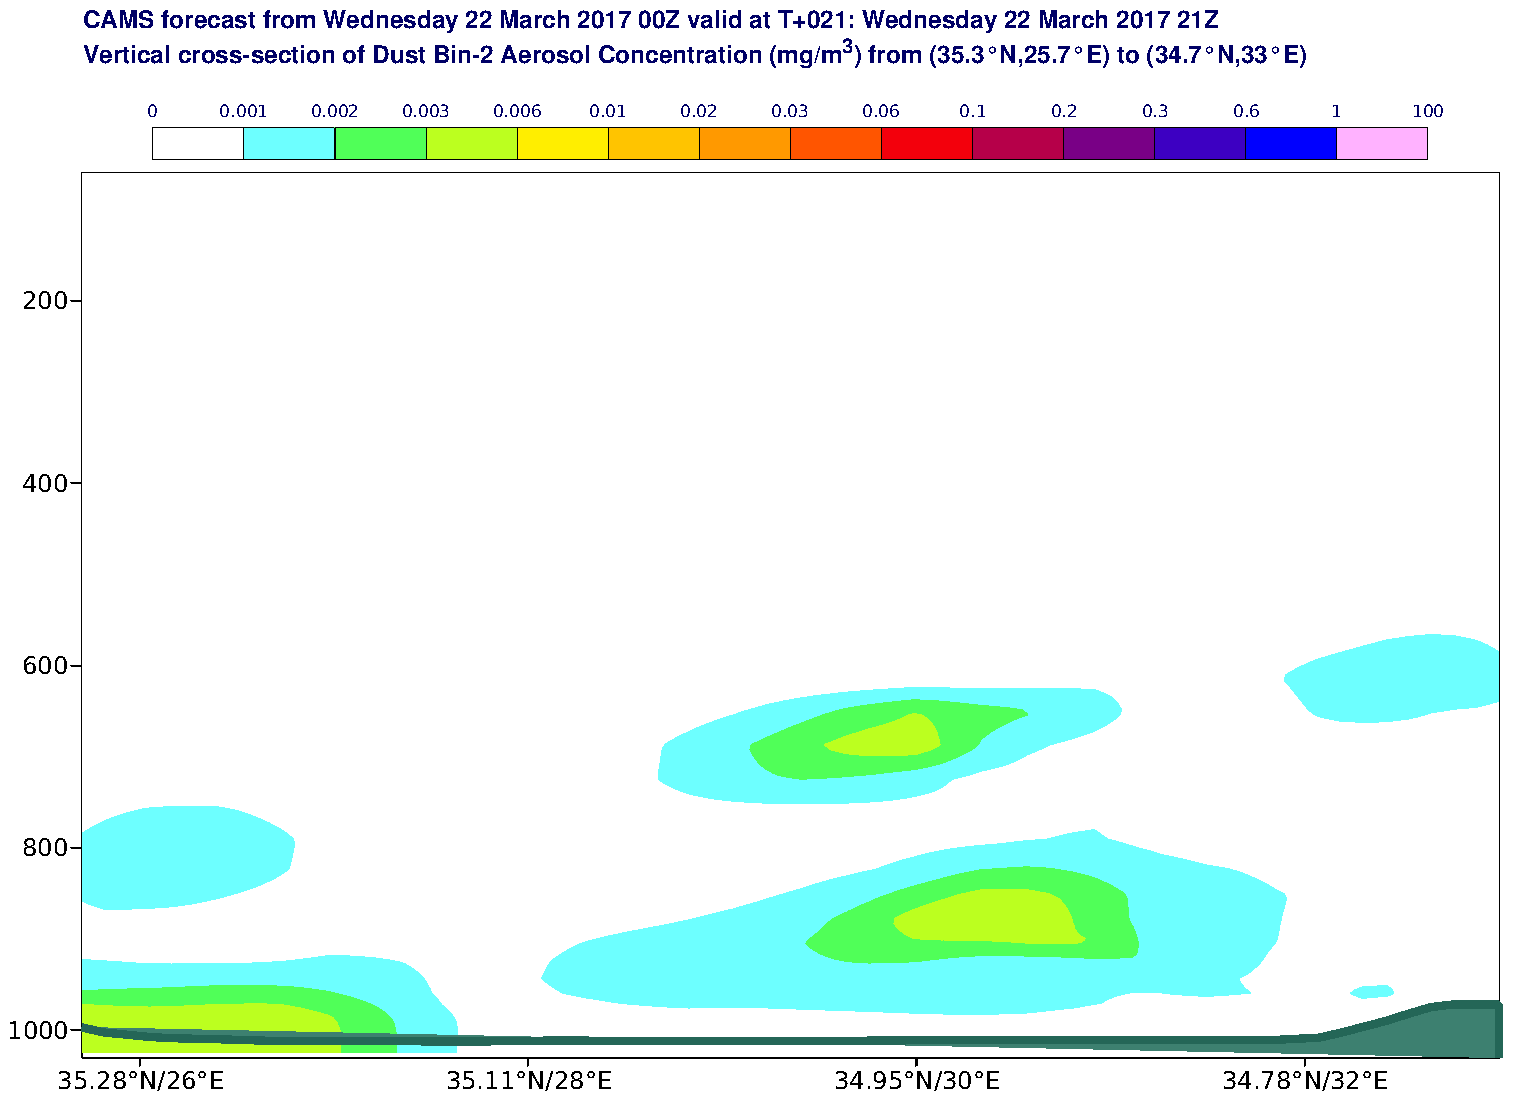 Vertical cross-section of Dust Bin-2 Aerosol Concentration (mg/m3) valid at T21 - 2017-03-22 21:00